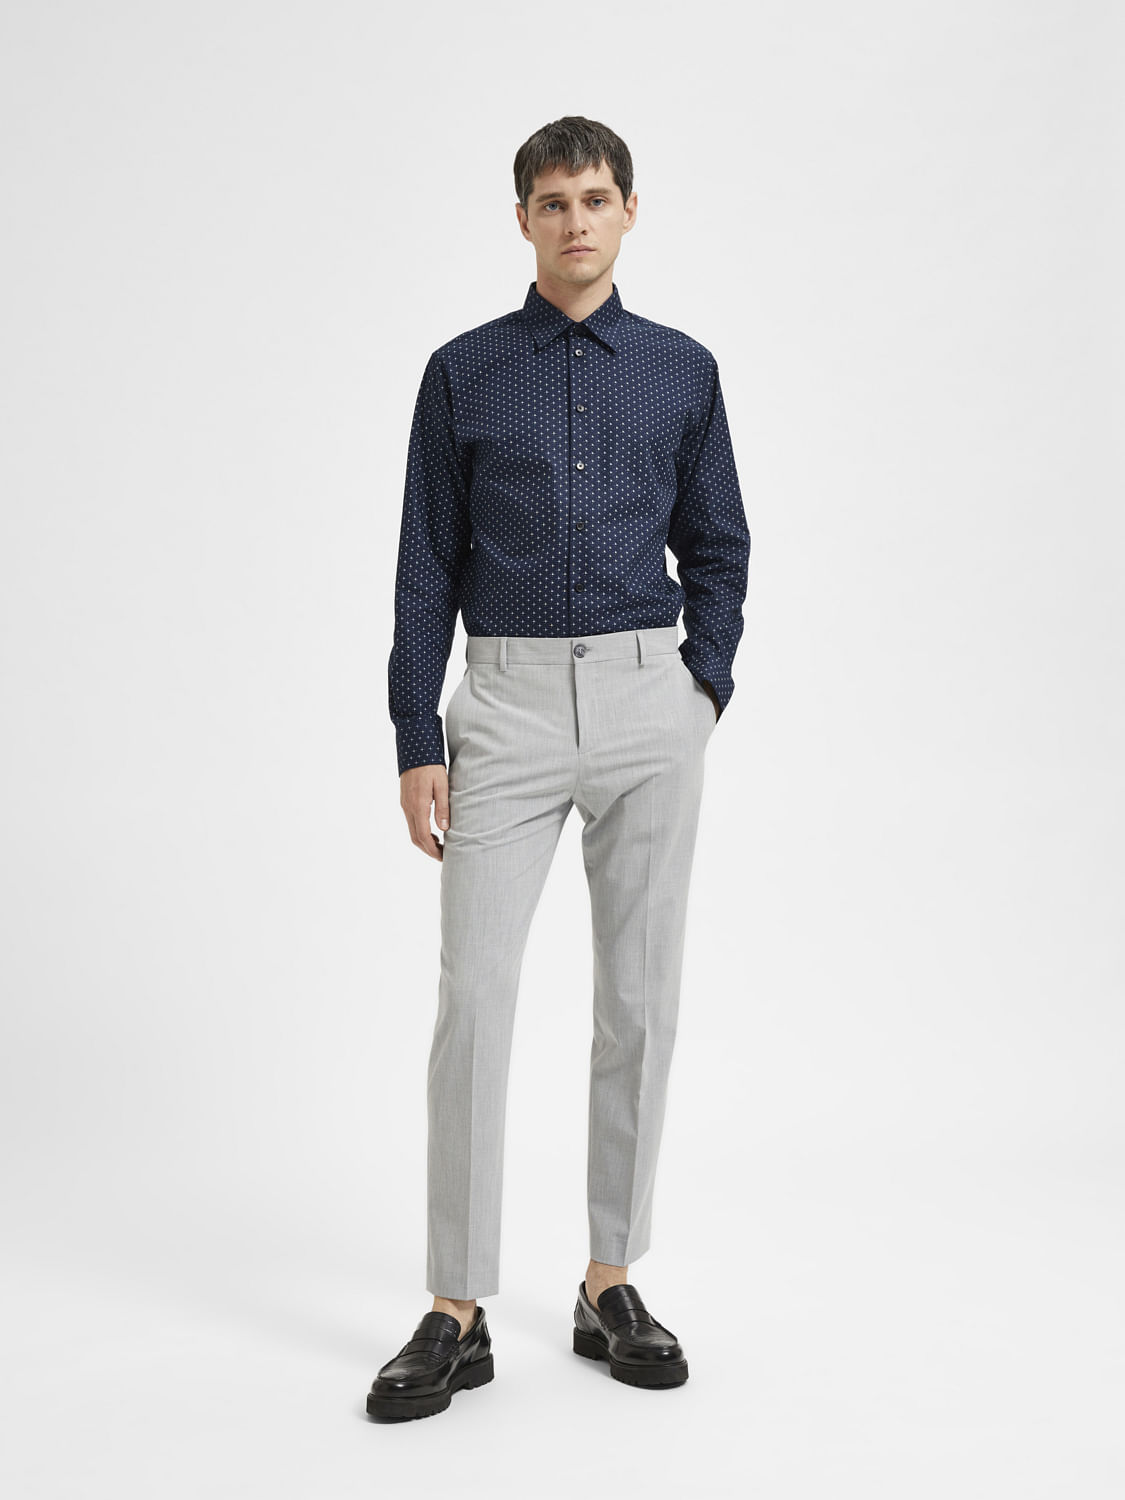 Would you wear a dark blue shirt with grey pants? - Quora